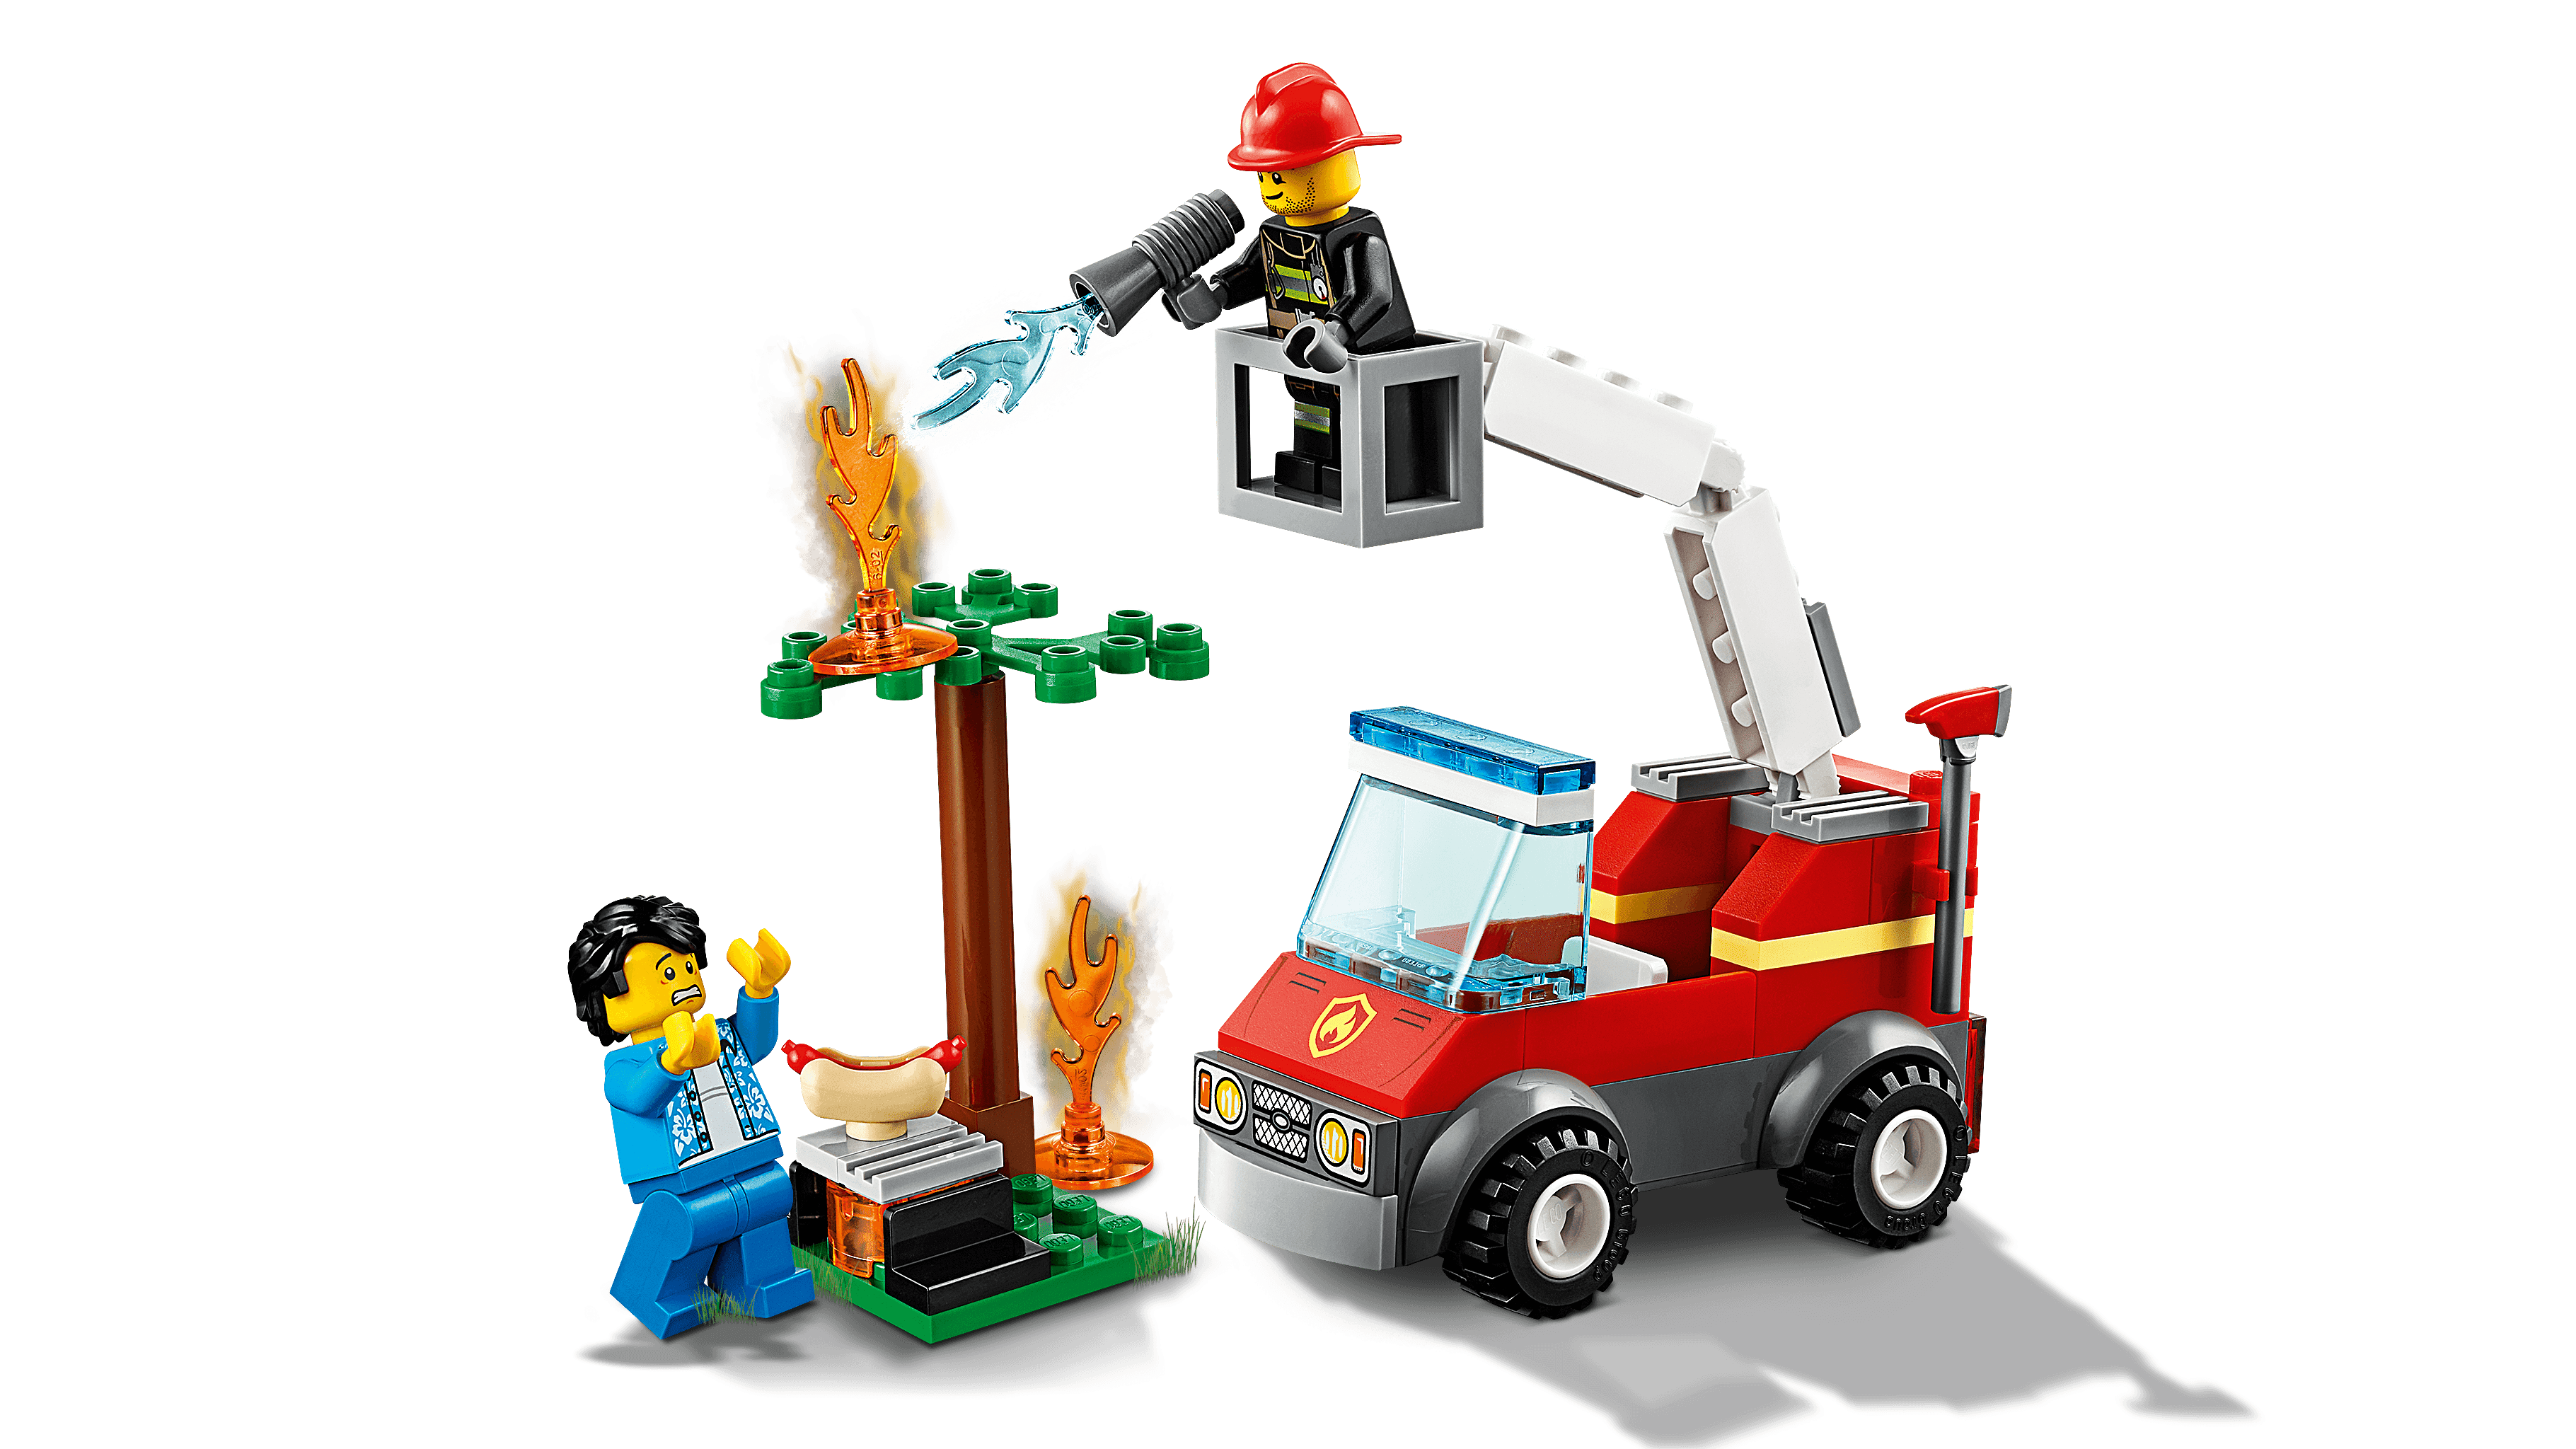 City Fire Barbecue Out 60212 Fire Truck Toy Walmart.com